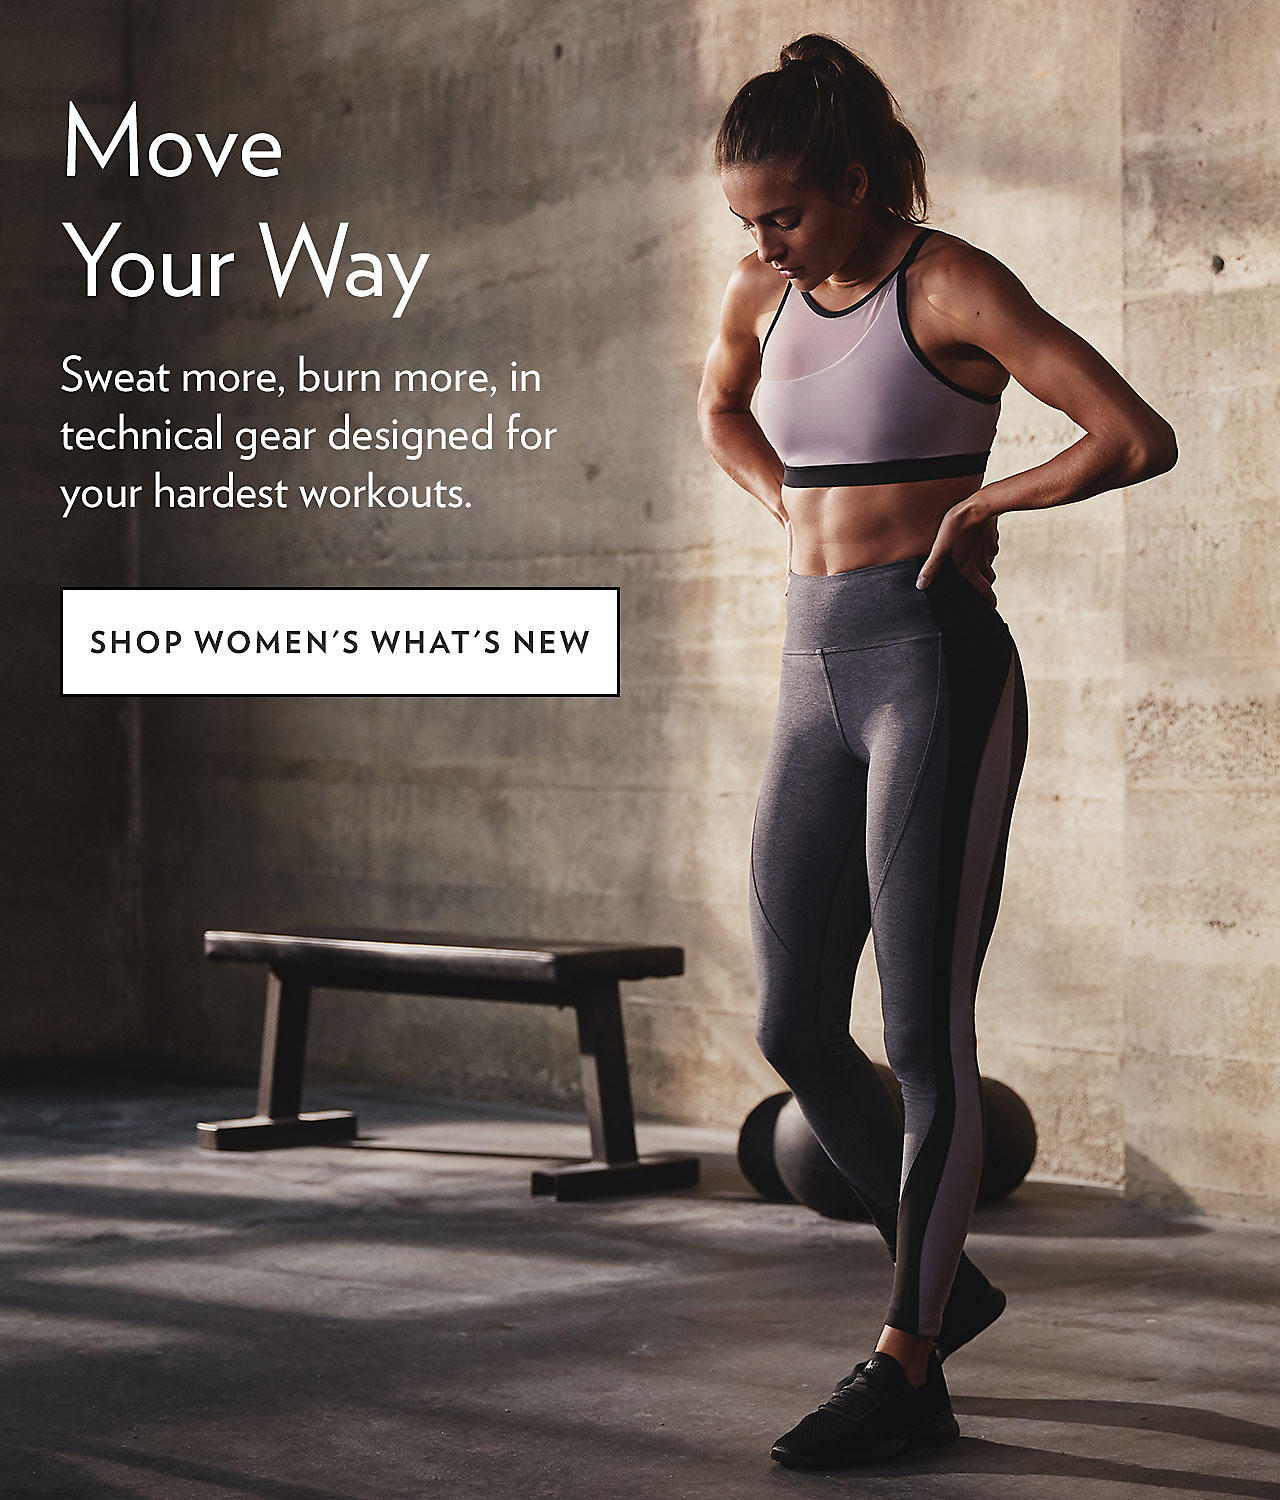 Move Your Way - SHOP WOMEN'S WHAT'S NEW